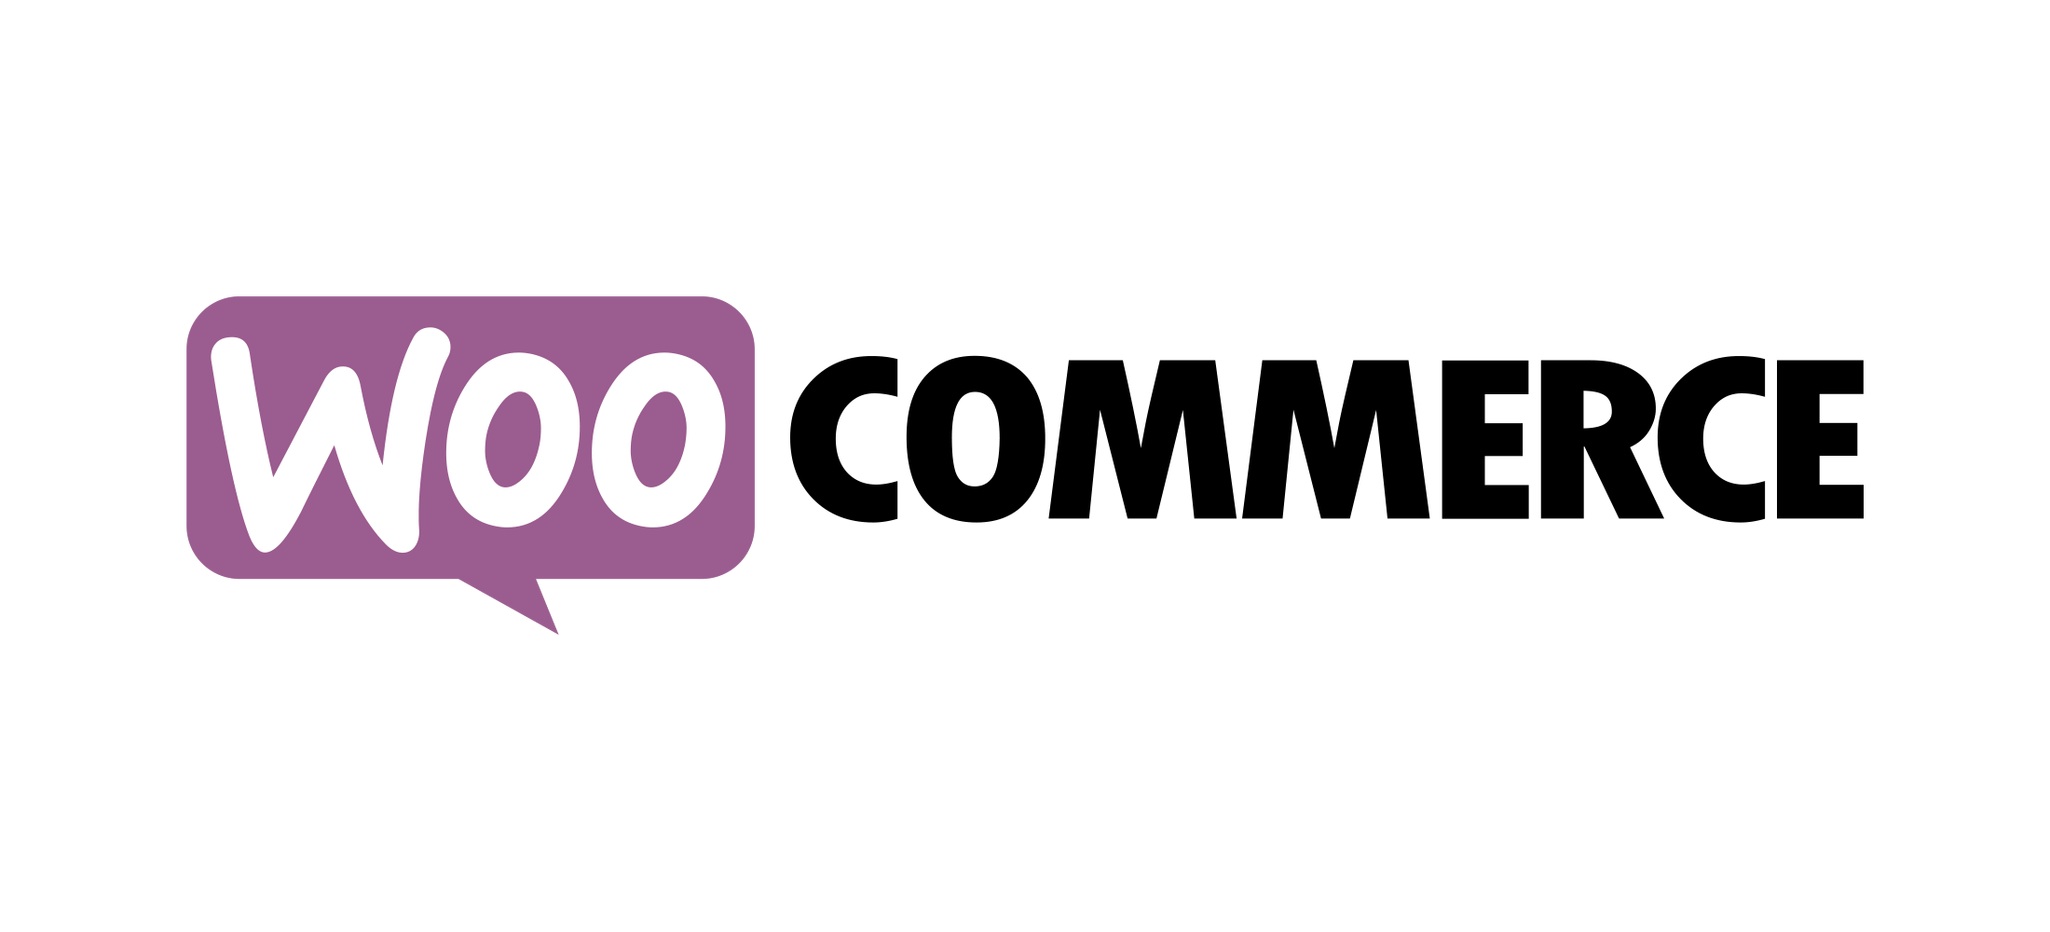 WooCommerce Launches New Mobile Apps for iOS and Android